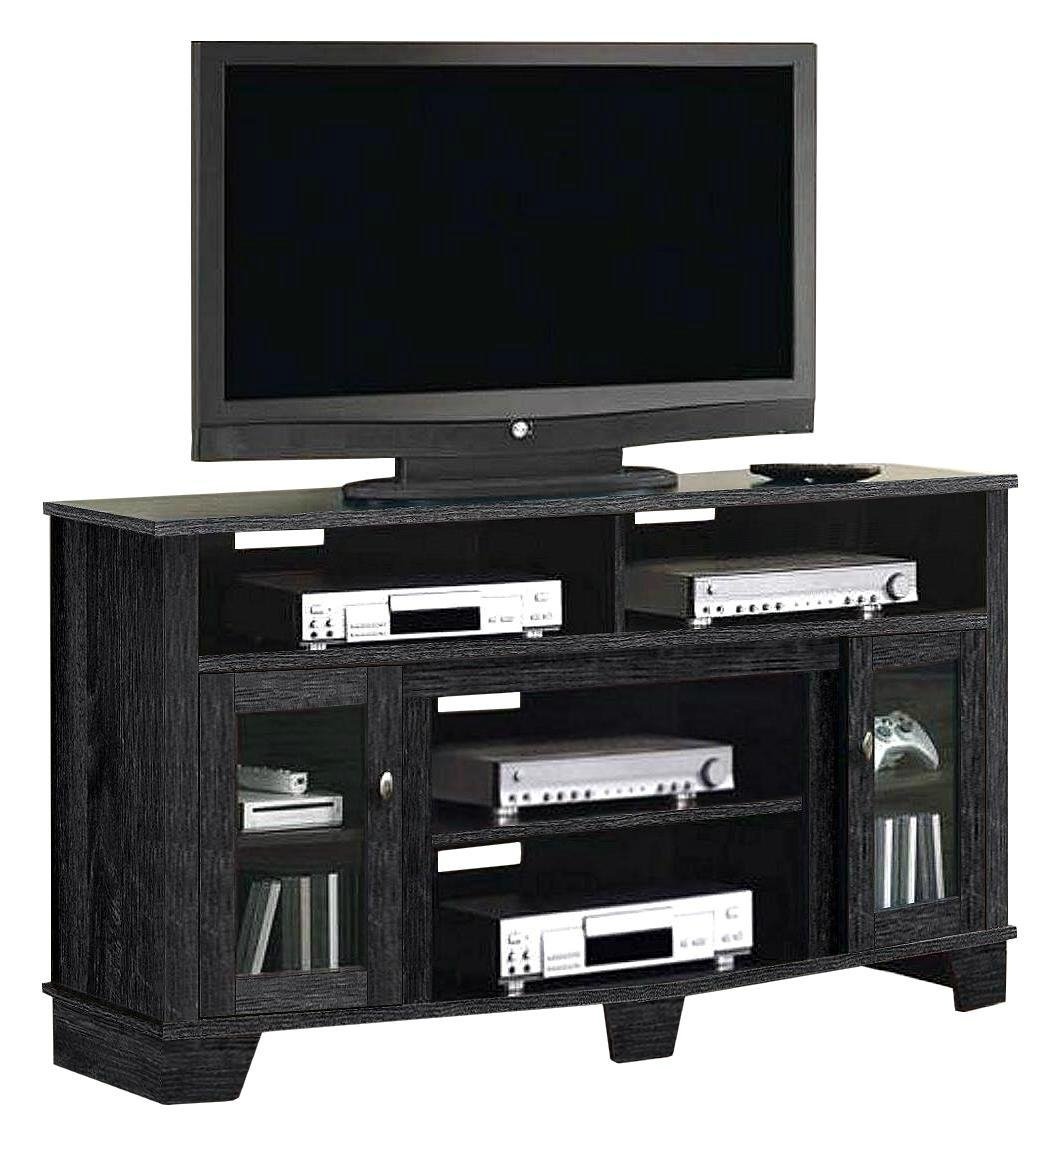 60 inch Charcoal Grey Modern Tall TV Stand Furniture 3